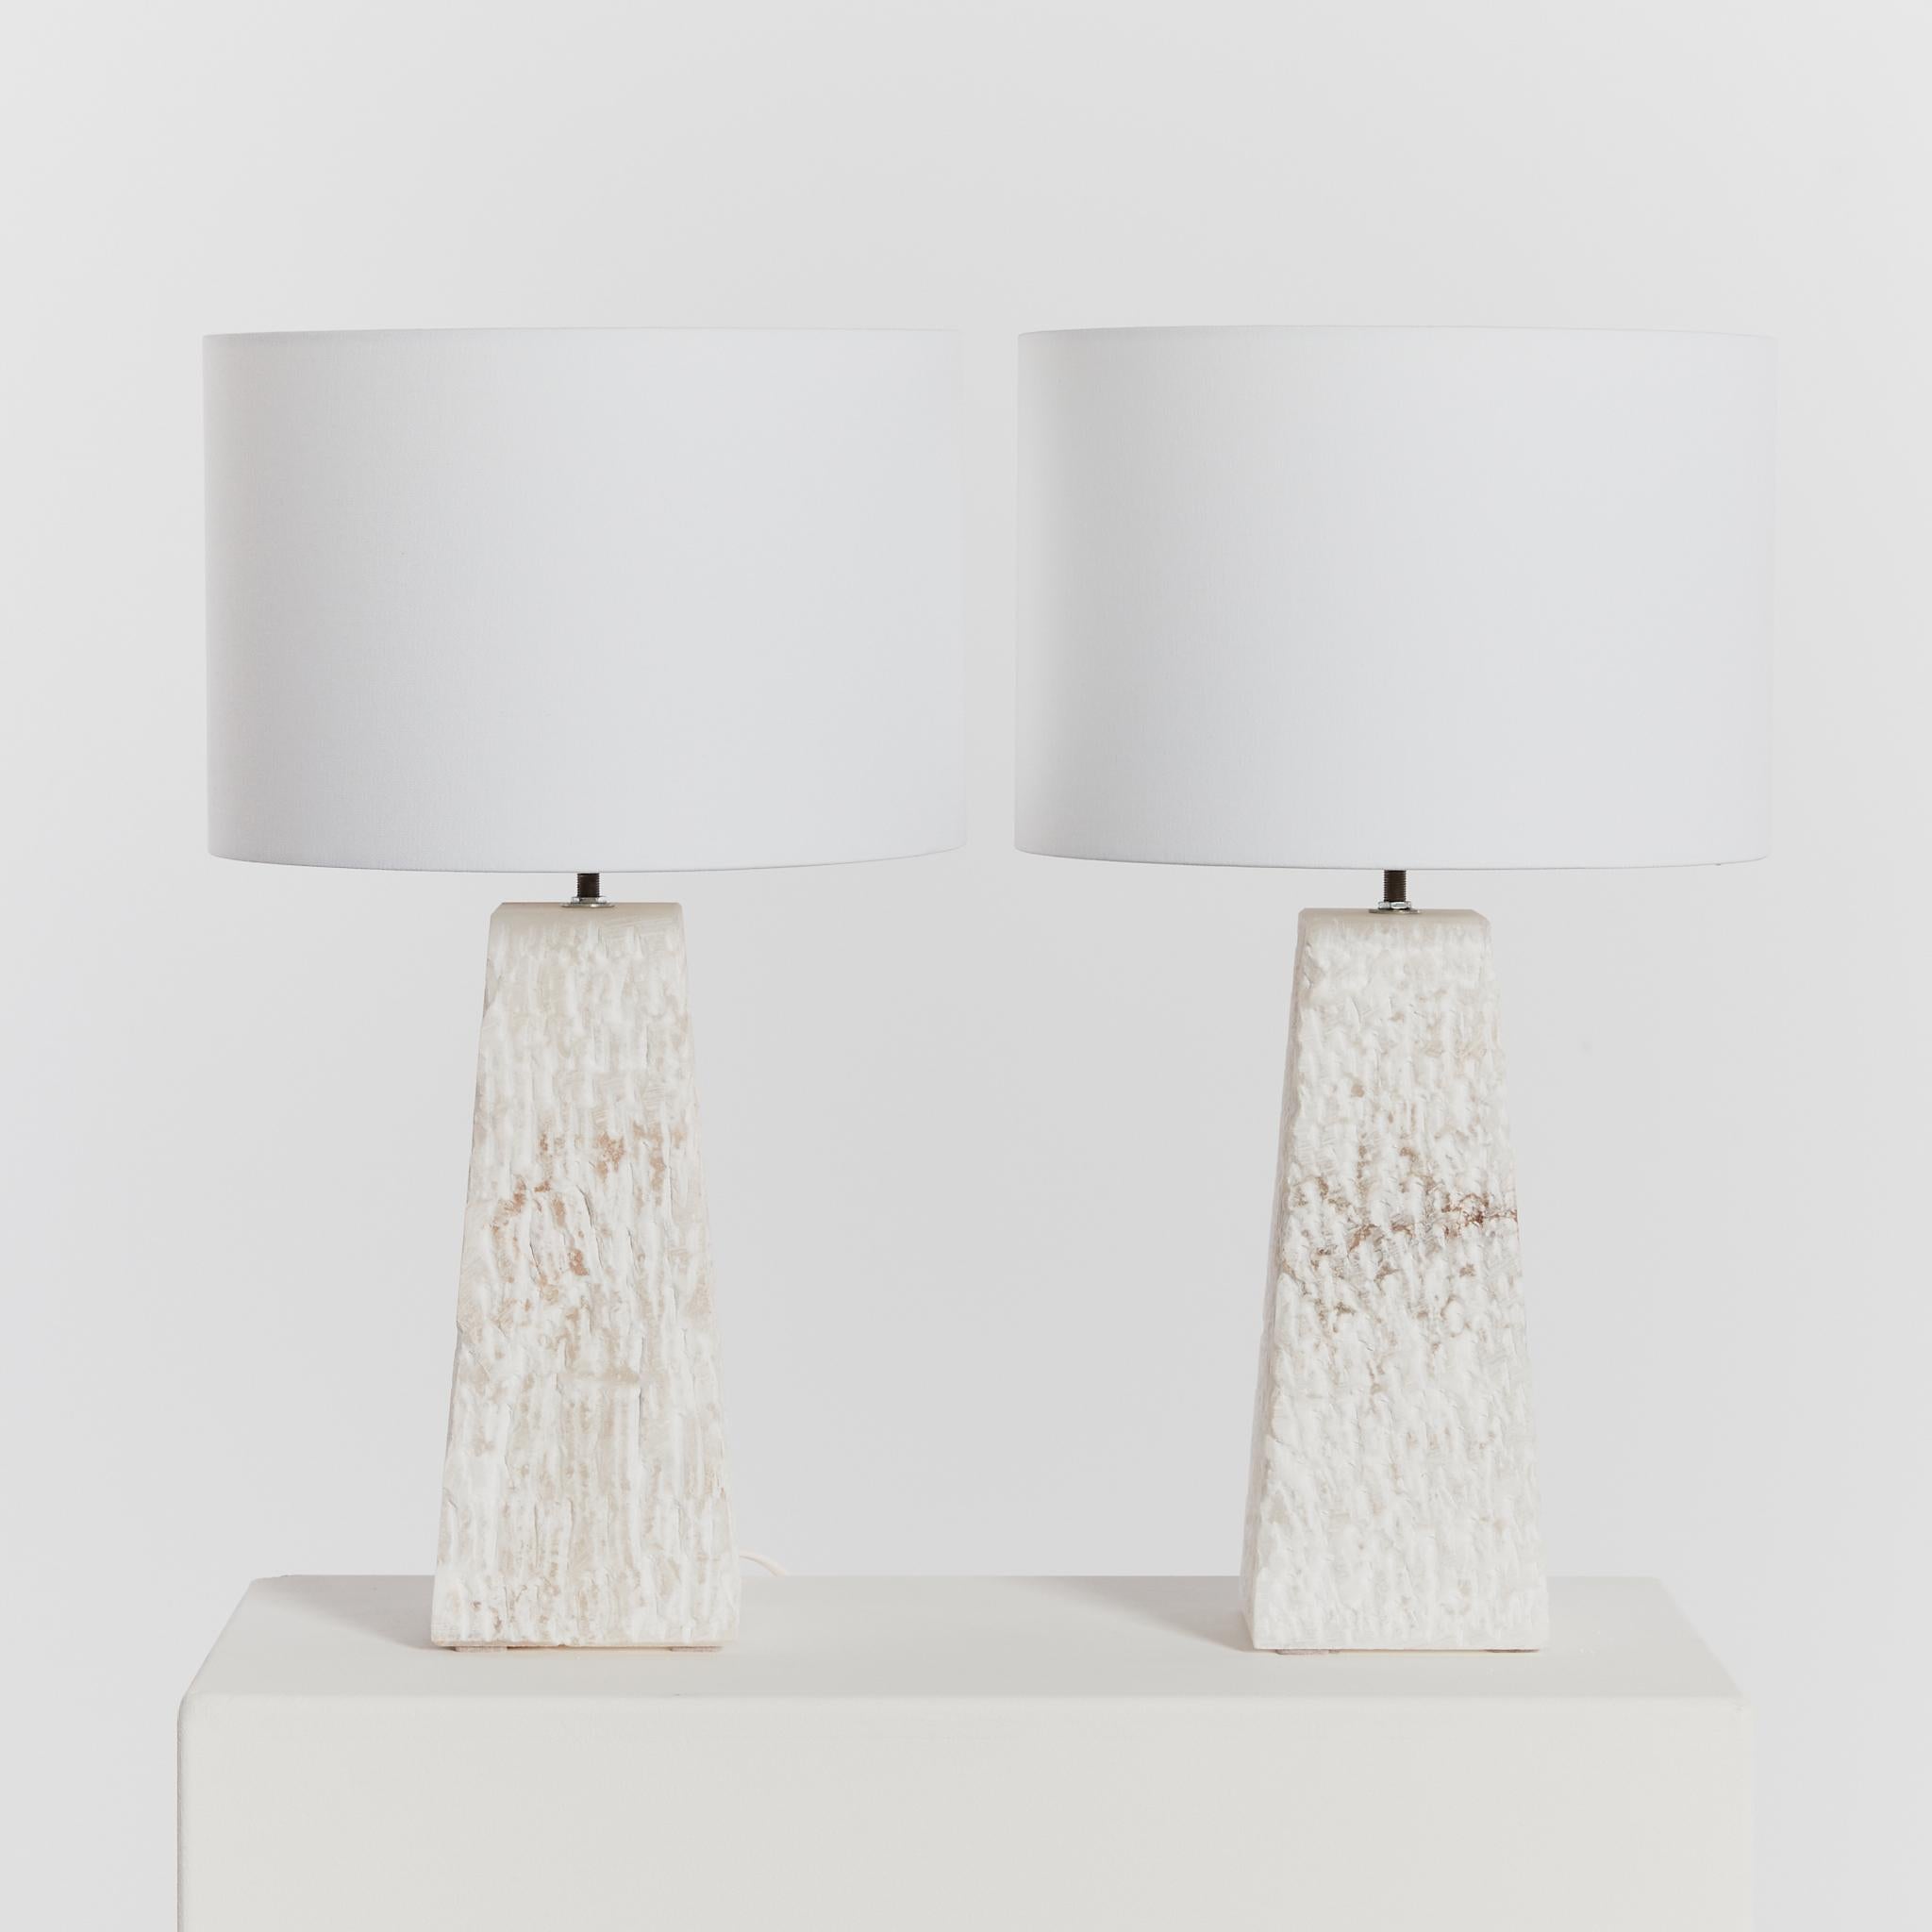 Pair of sculptural stippled stone lamps with trapeze form. Each carved from a single piece of Spanish alabaster, these statement lamps each include a new linen lamp shade.

This pair came from a town in Spain known for its alabaster quarry, which is